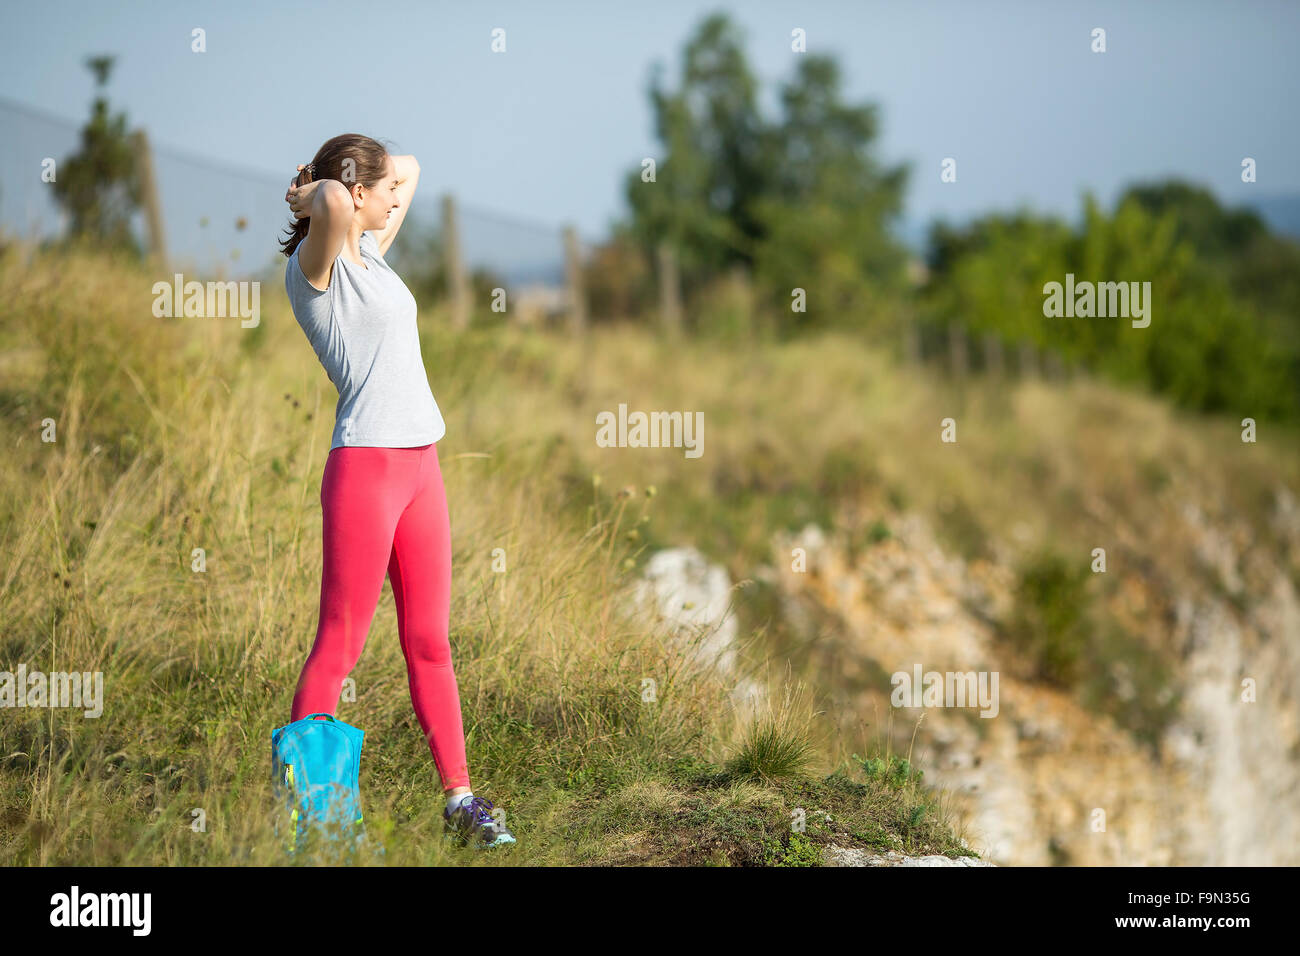 Young sports girl standing outdoors. Stock Photo